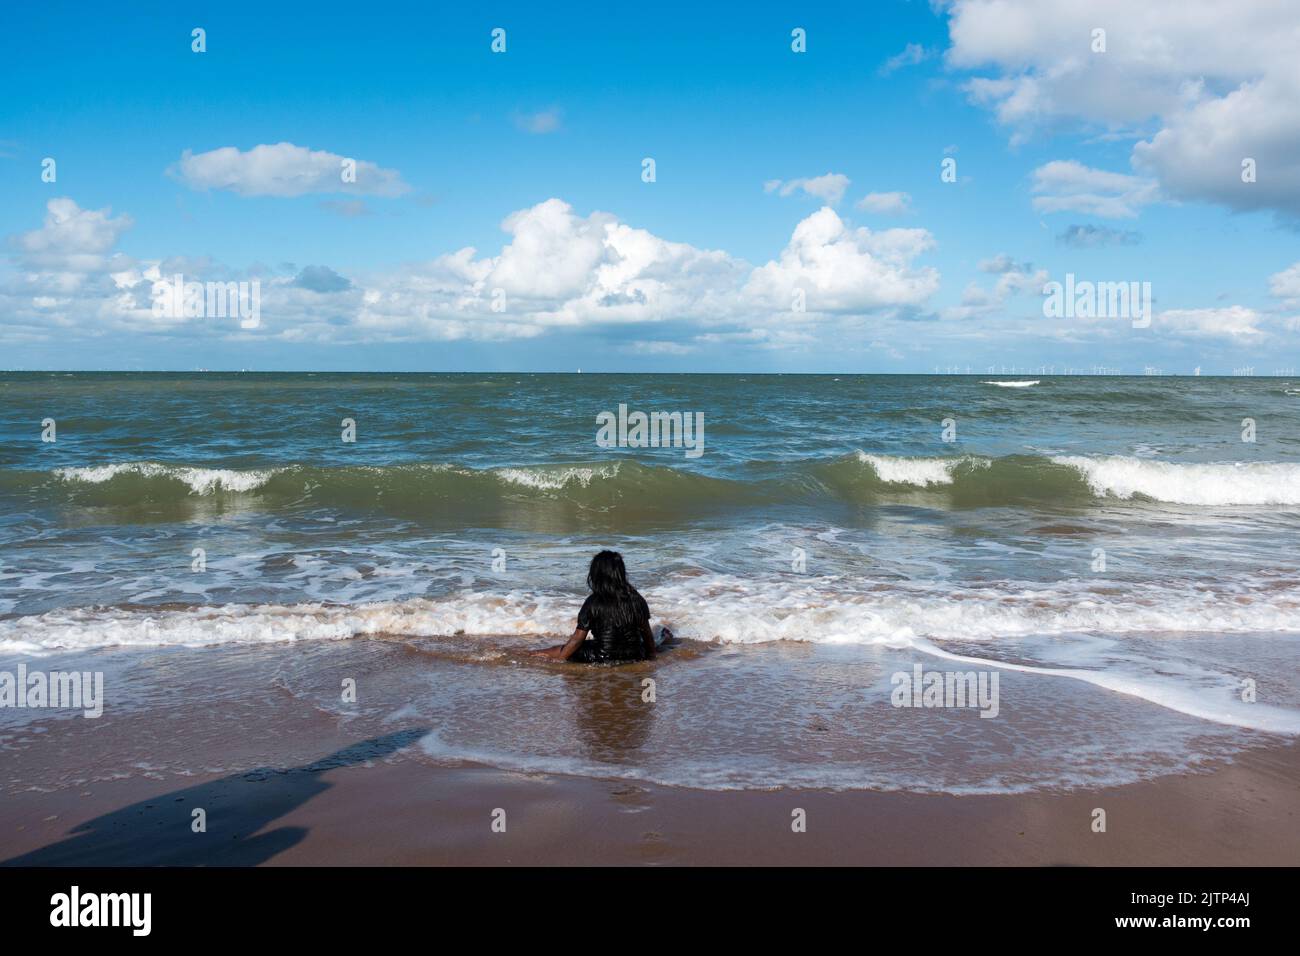 Young child in dark clothing sitting in the waves Stock Photo